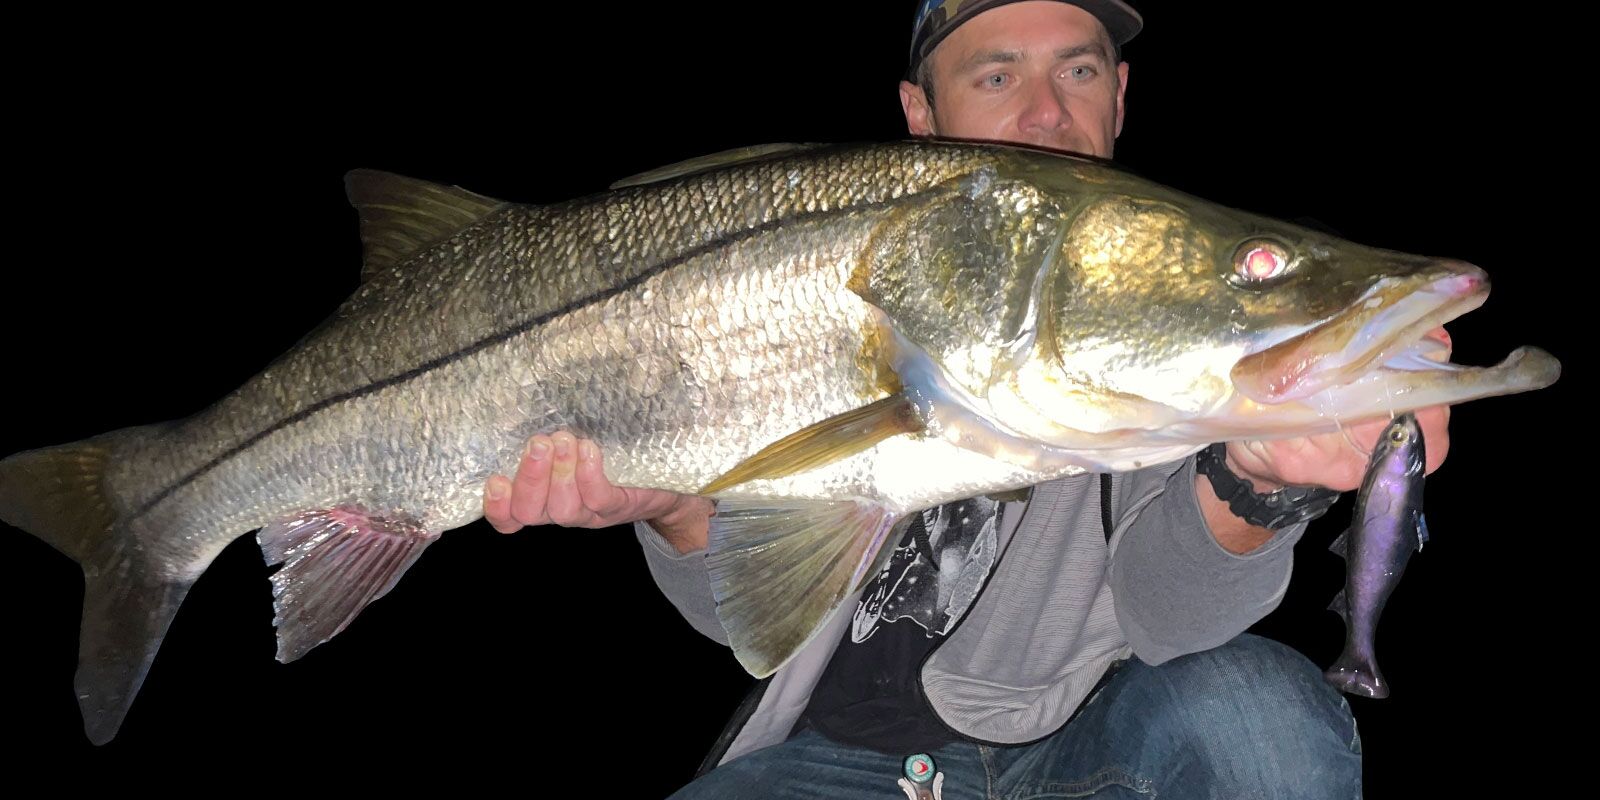 Best Baits for Snook - Snook Snacks